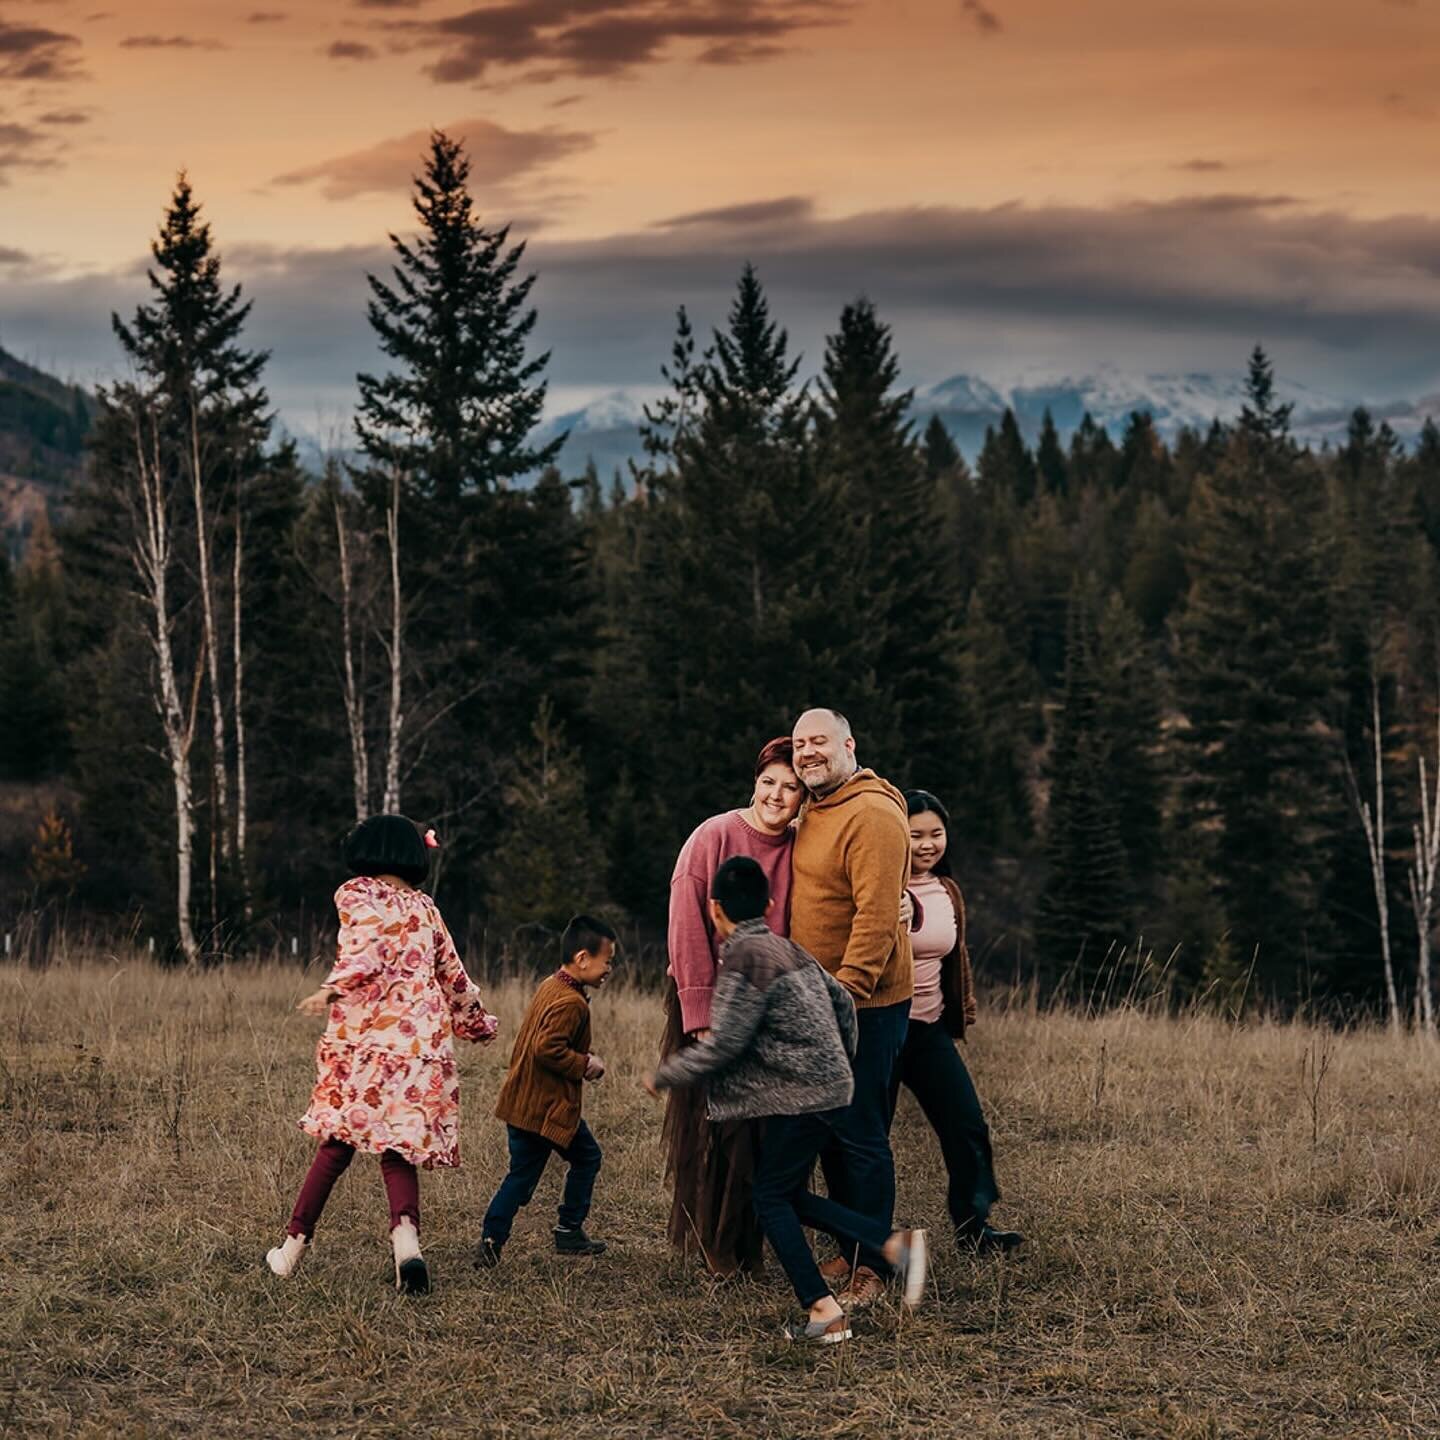 Love this family! 🏔️ 🌅 things don&rsquo;t always go as planned but they show up with the best attitudes for their yearly holiday  photo tradition! 
.
#montanafamily #montanafamilyphotographer #montana #montanacolors #406 #boldemotionalcolorful #mom